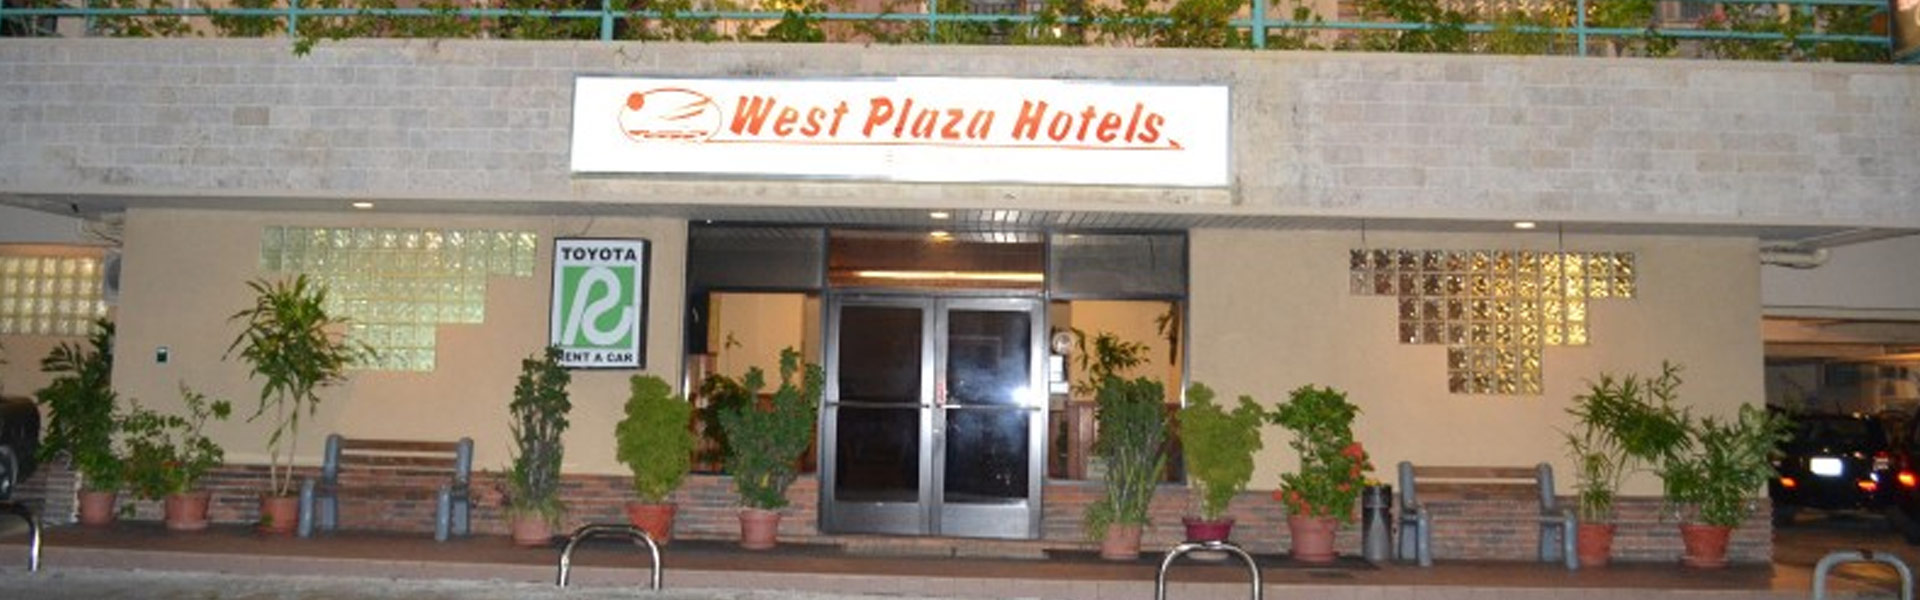 West Plaza Hotel By The Sea Banner Image